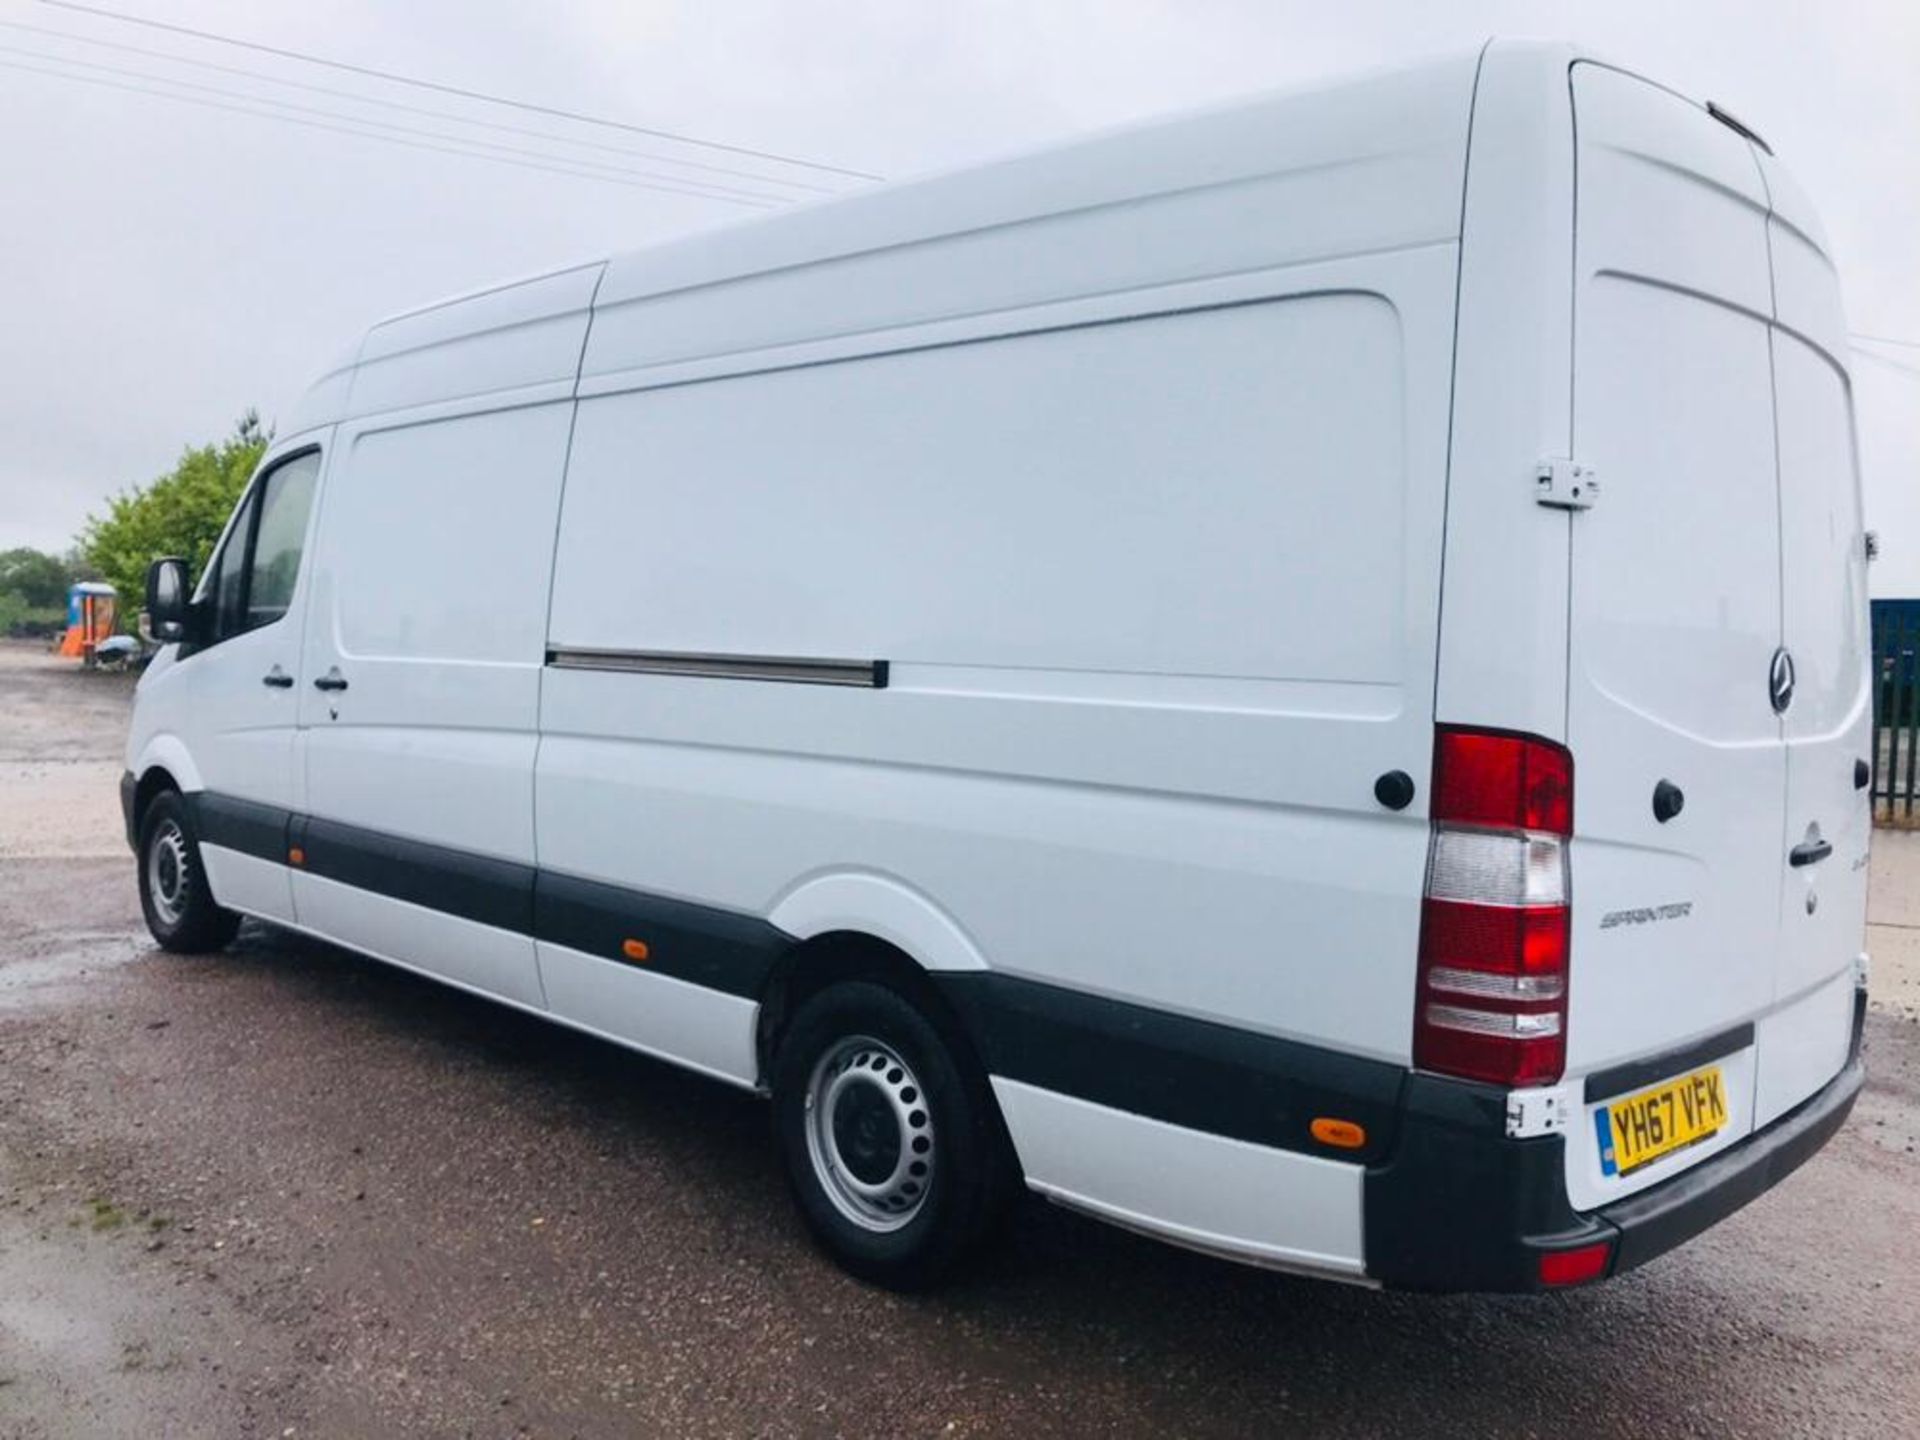 (ON SALE) MERCEDES SPRINTER 314CDI "140BHP" LWB (2018 MODEL) EURO 6 - LONDON COMPLIANT-DONT MISS OUT - Image 3 of 19